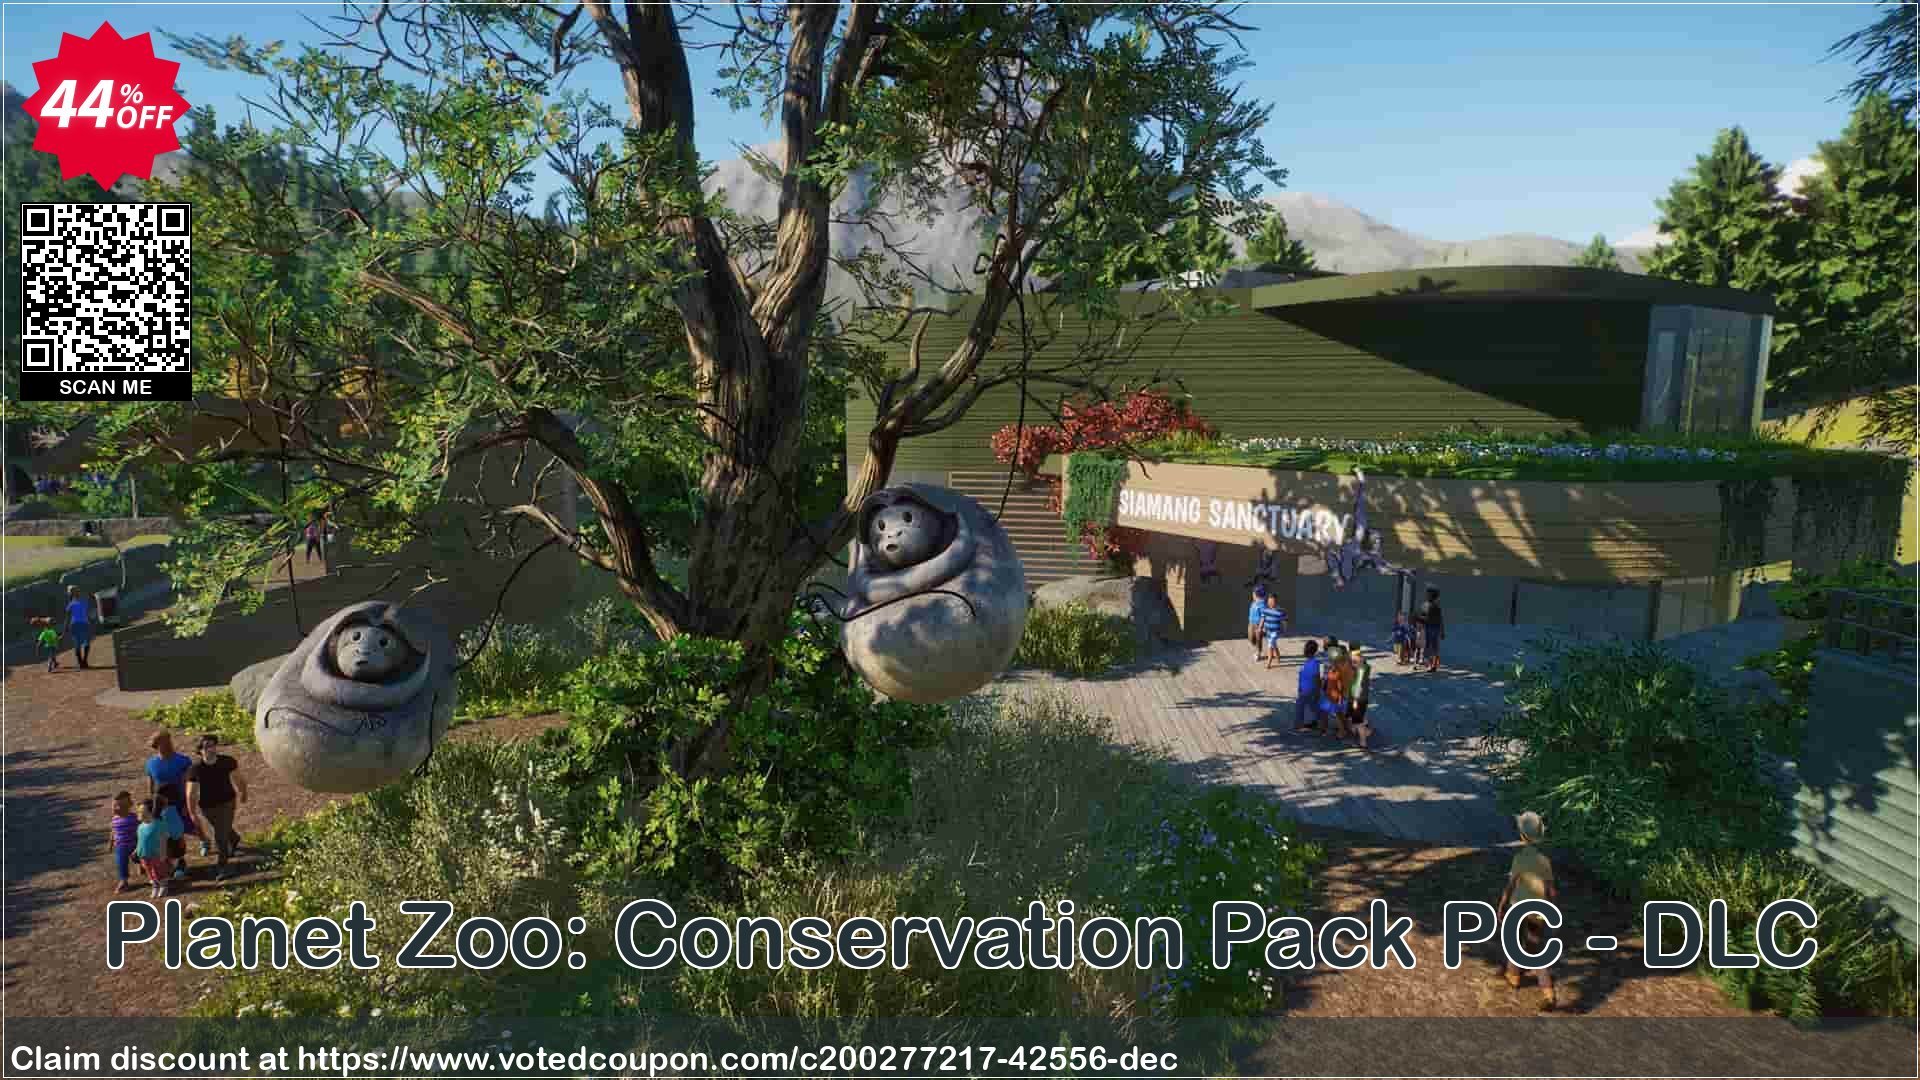 Planet Zoo: Conservation Pack PC - DLC Coupon Code May 2024, 44% OFF - VotedCoupon